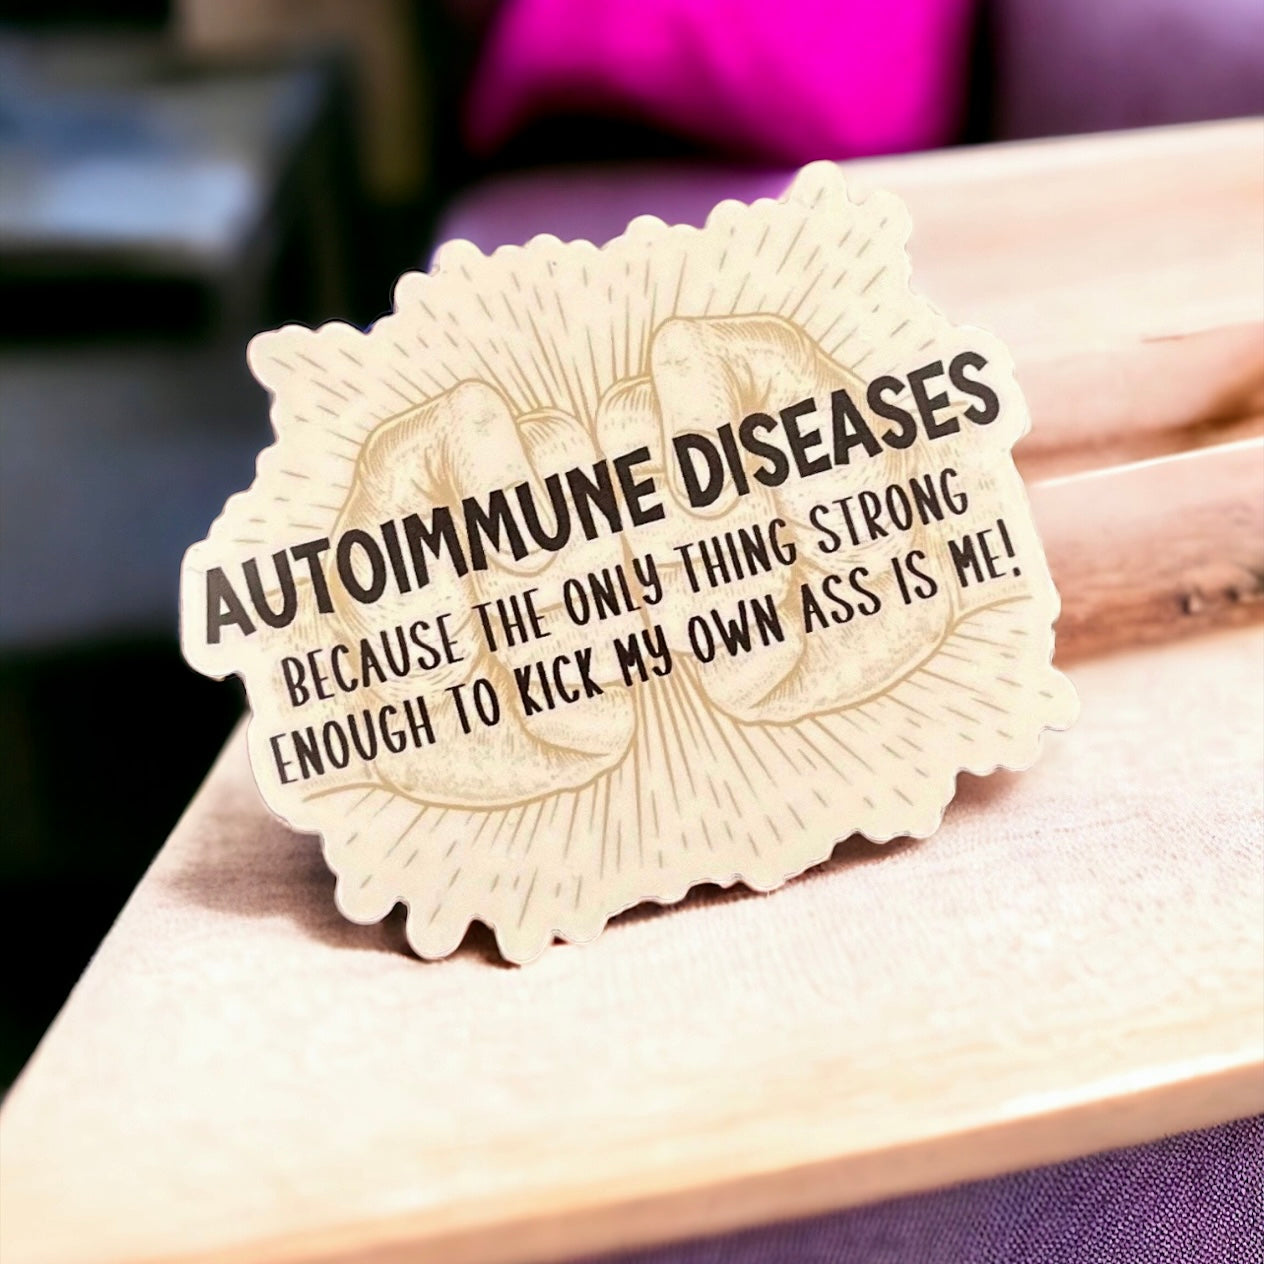 Autoimmune Diseases - Because The Only Thing Strong Enough To Kick My Ass Is Me Sticker